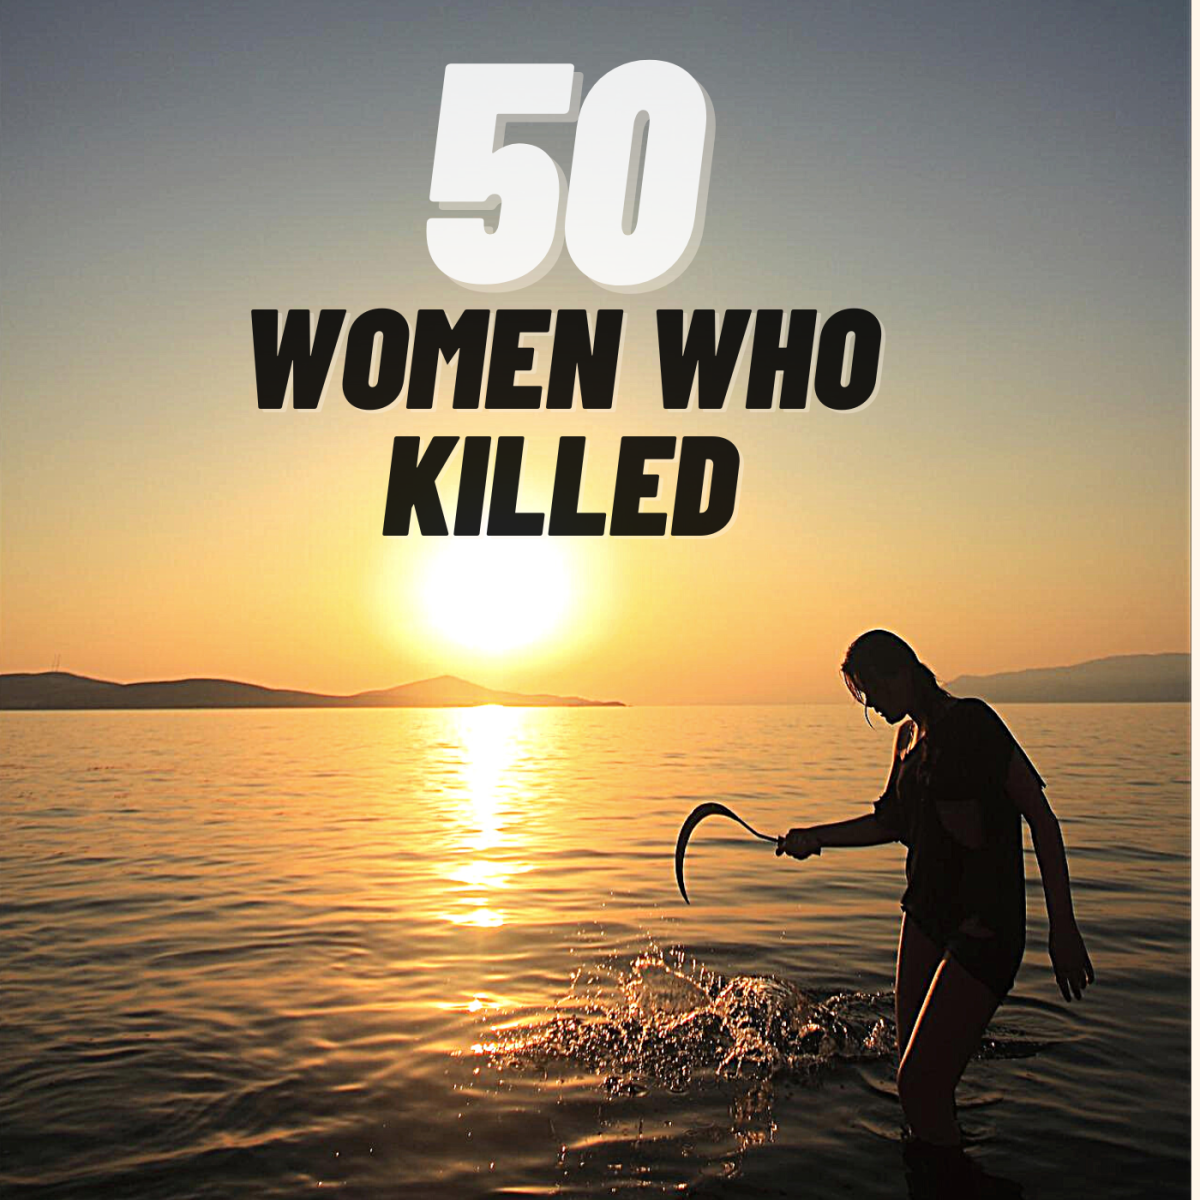 50 American Women Who Killed: Stories in 50 Words or Less